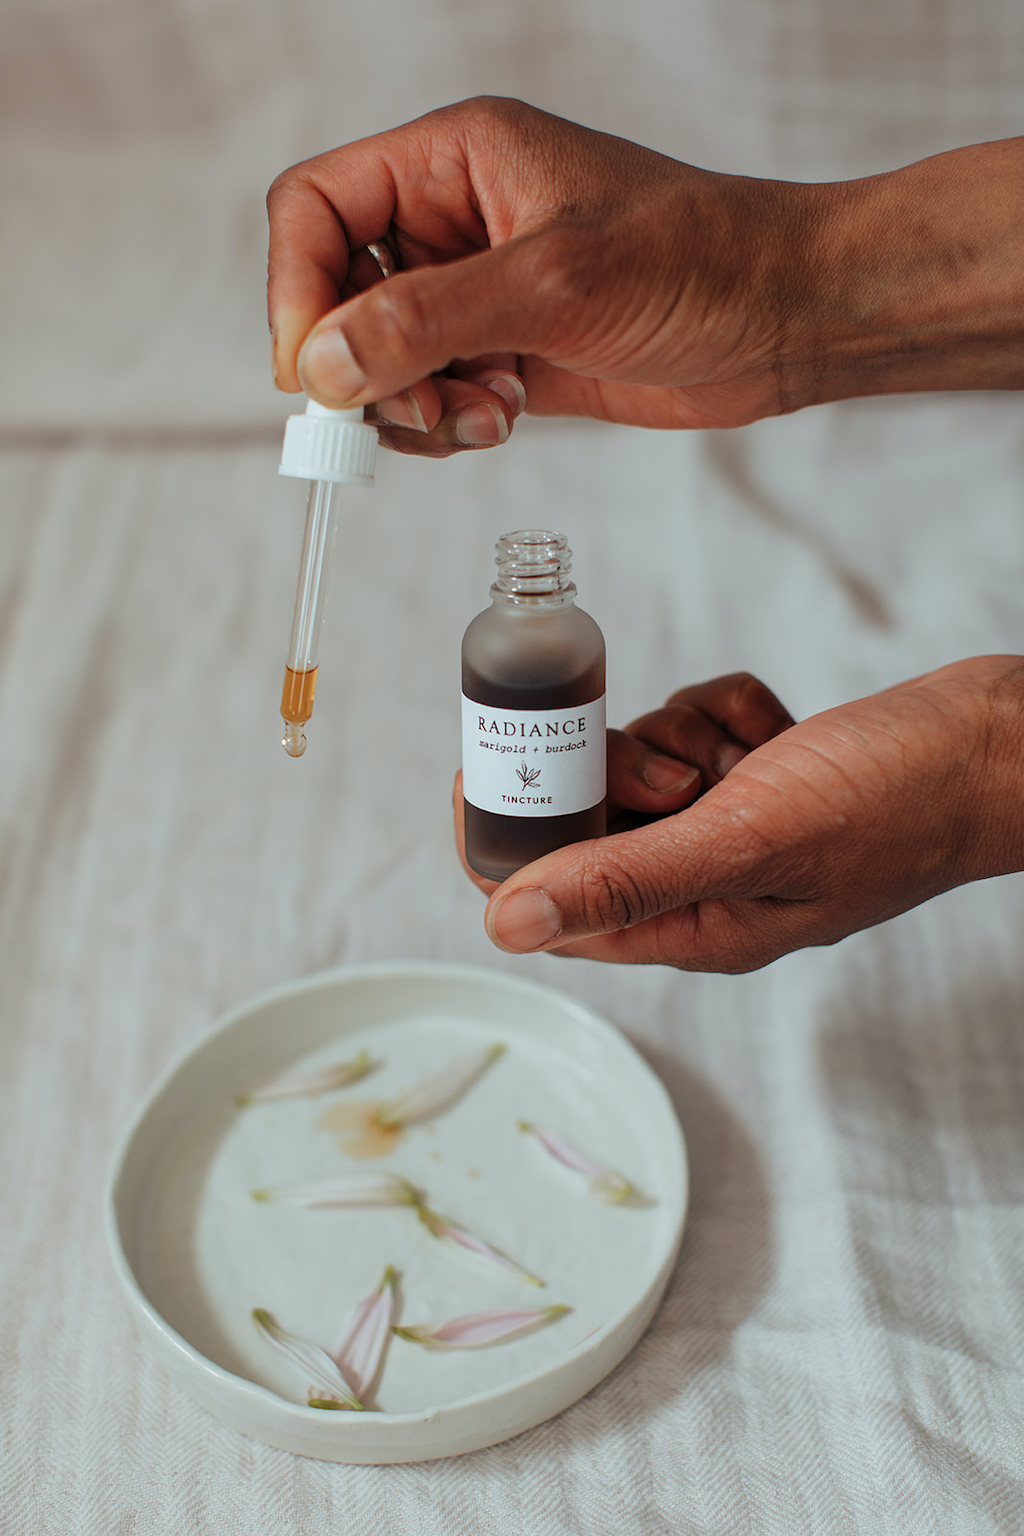 Forage Botanicals Radiance Tincture. Vegan hormone help. A person is holding the bottle in one hand and using the pipette to drop the tincture on a small white ceramic plate. There are dried flower petals on the plate.